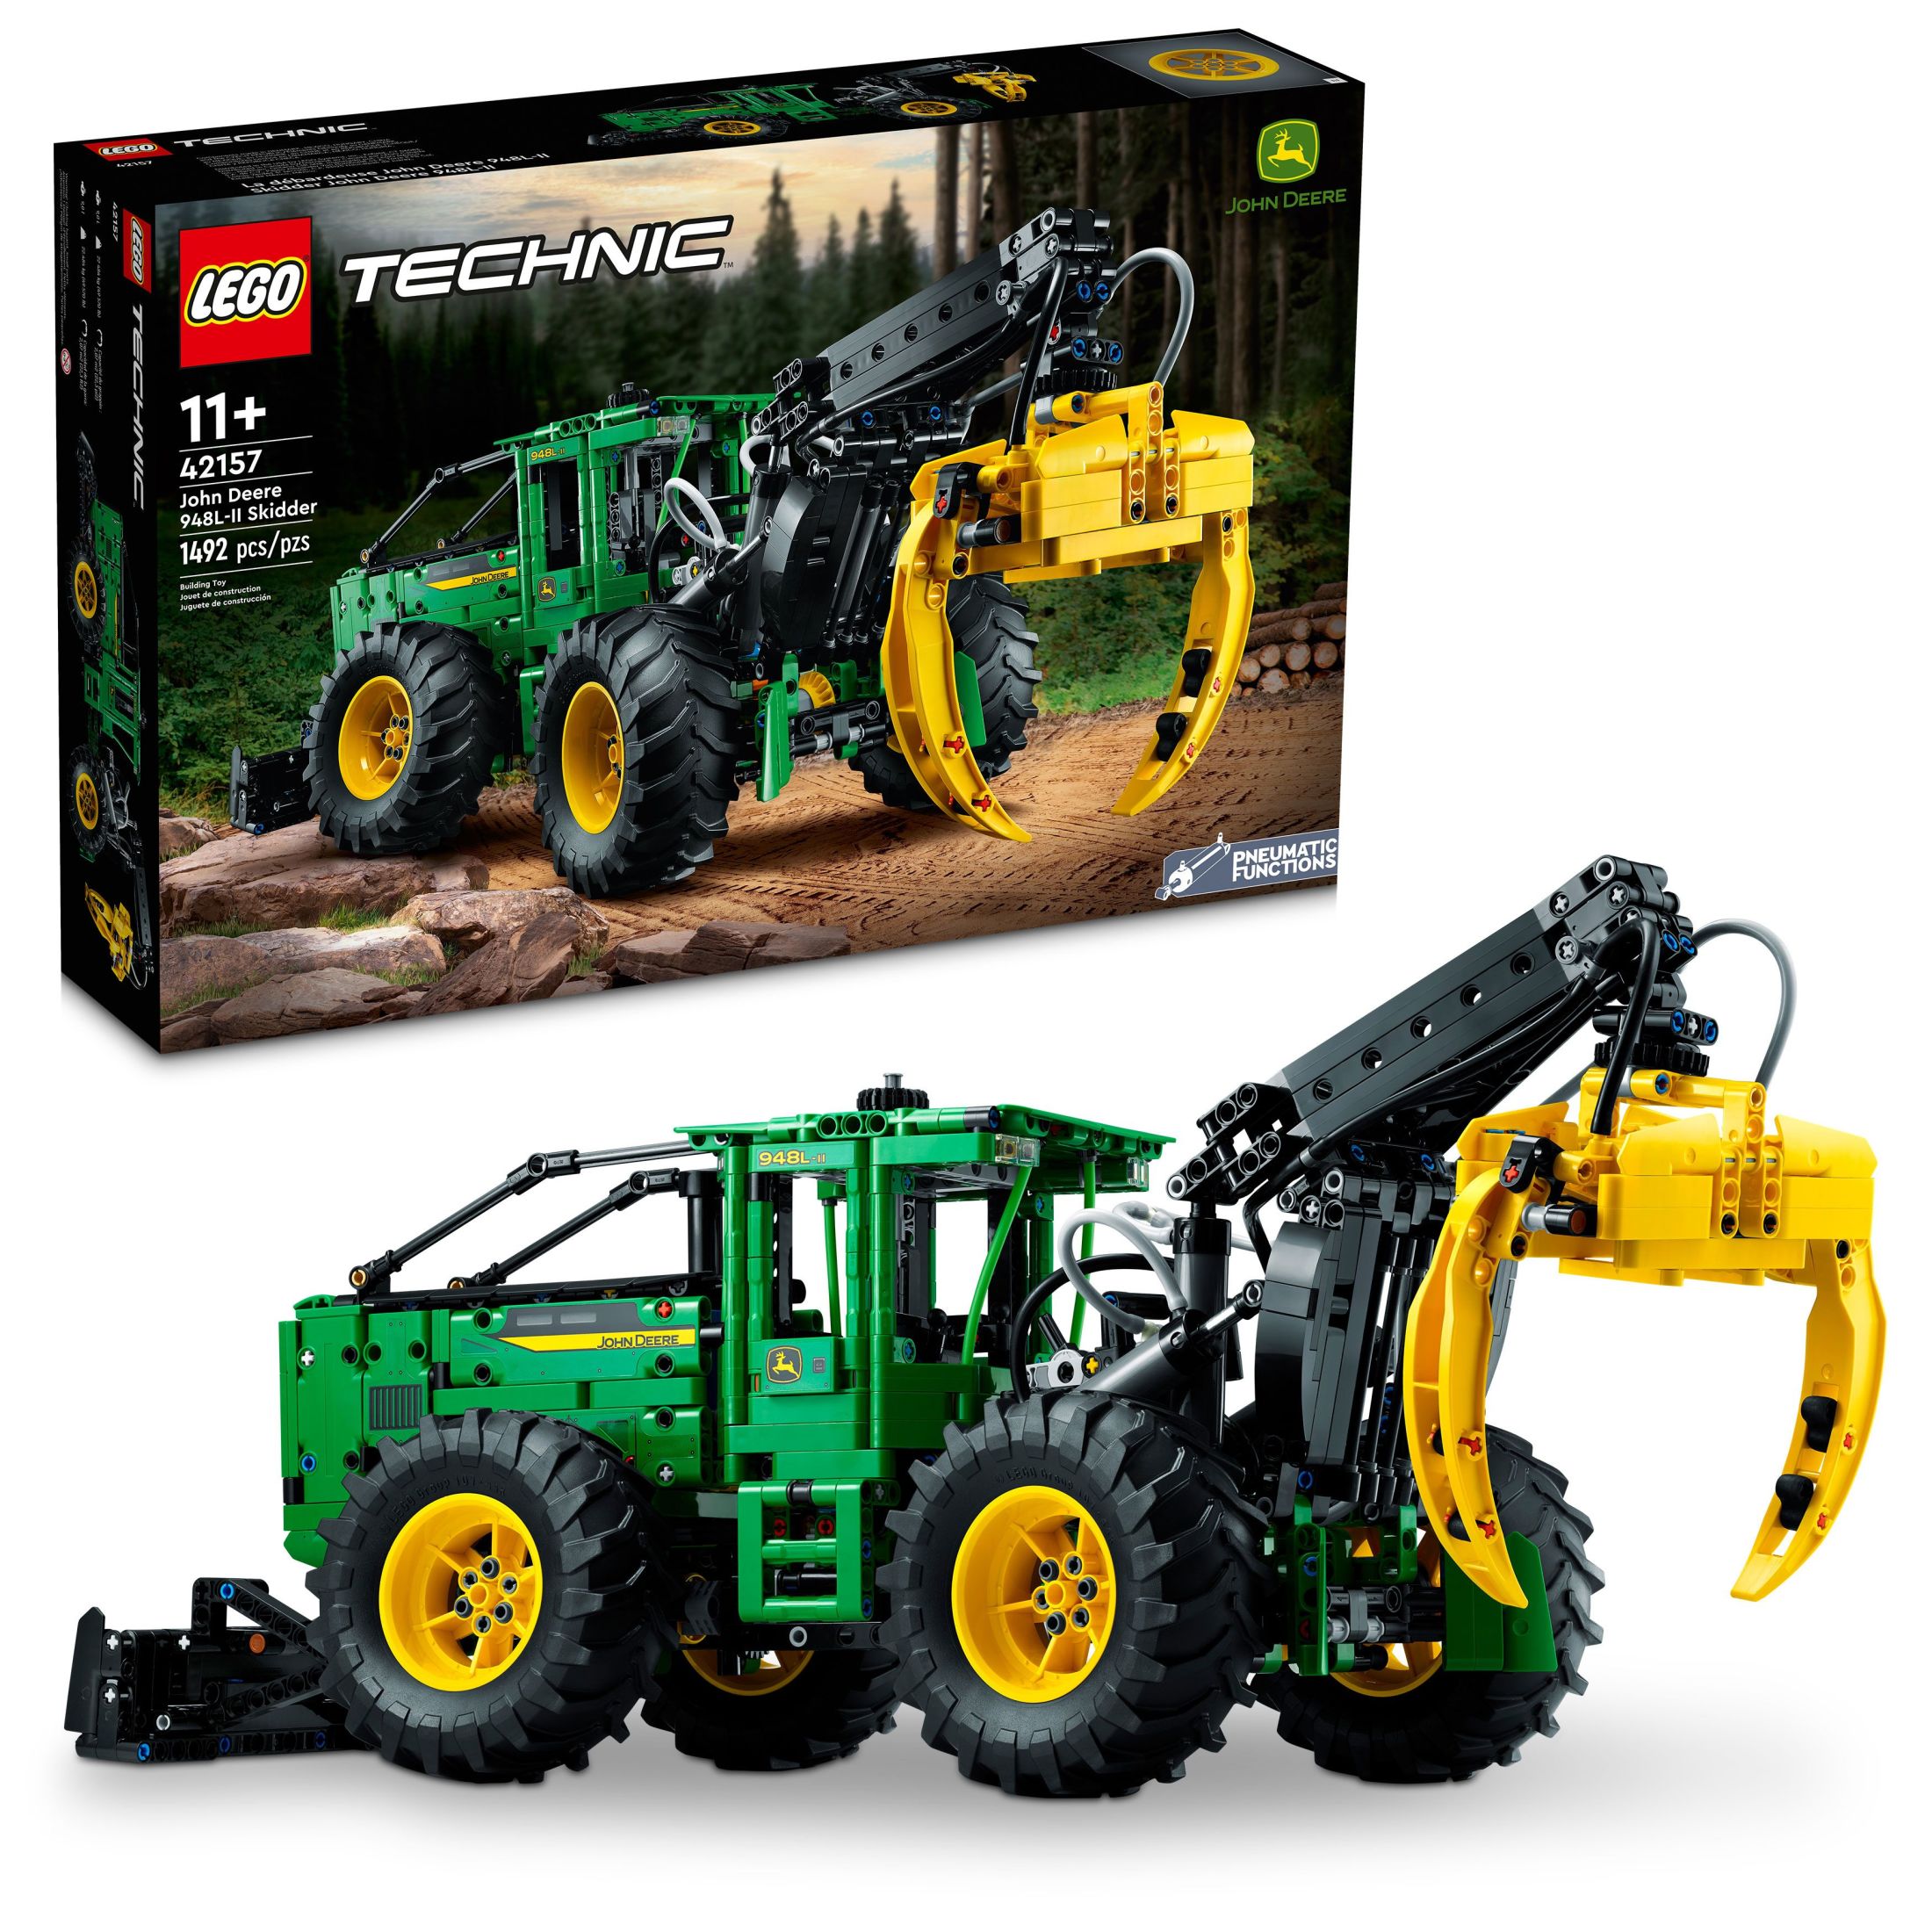 LEGO Technic John Deere 948L-II Skidder 42157 Advanced Tractor Toy Building Kit for Kids Ages 11 and Up, Gift for Kids Who Love Engineering and Heavy-Duty Farm Vehicles - image 1 of 9